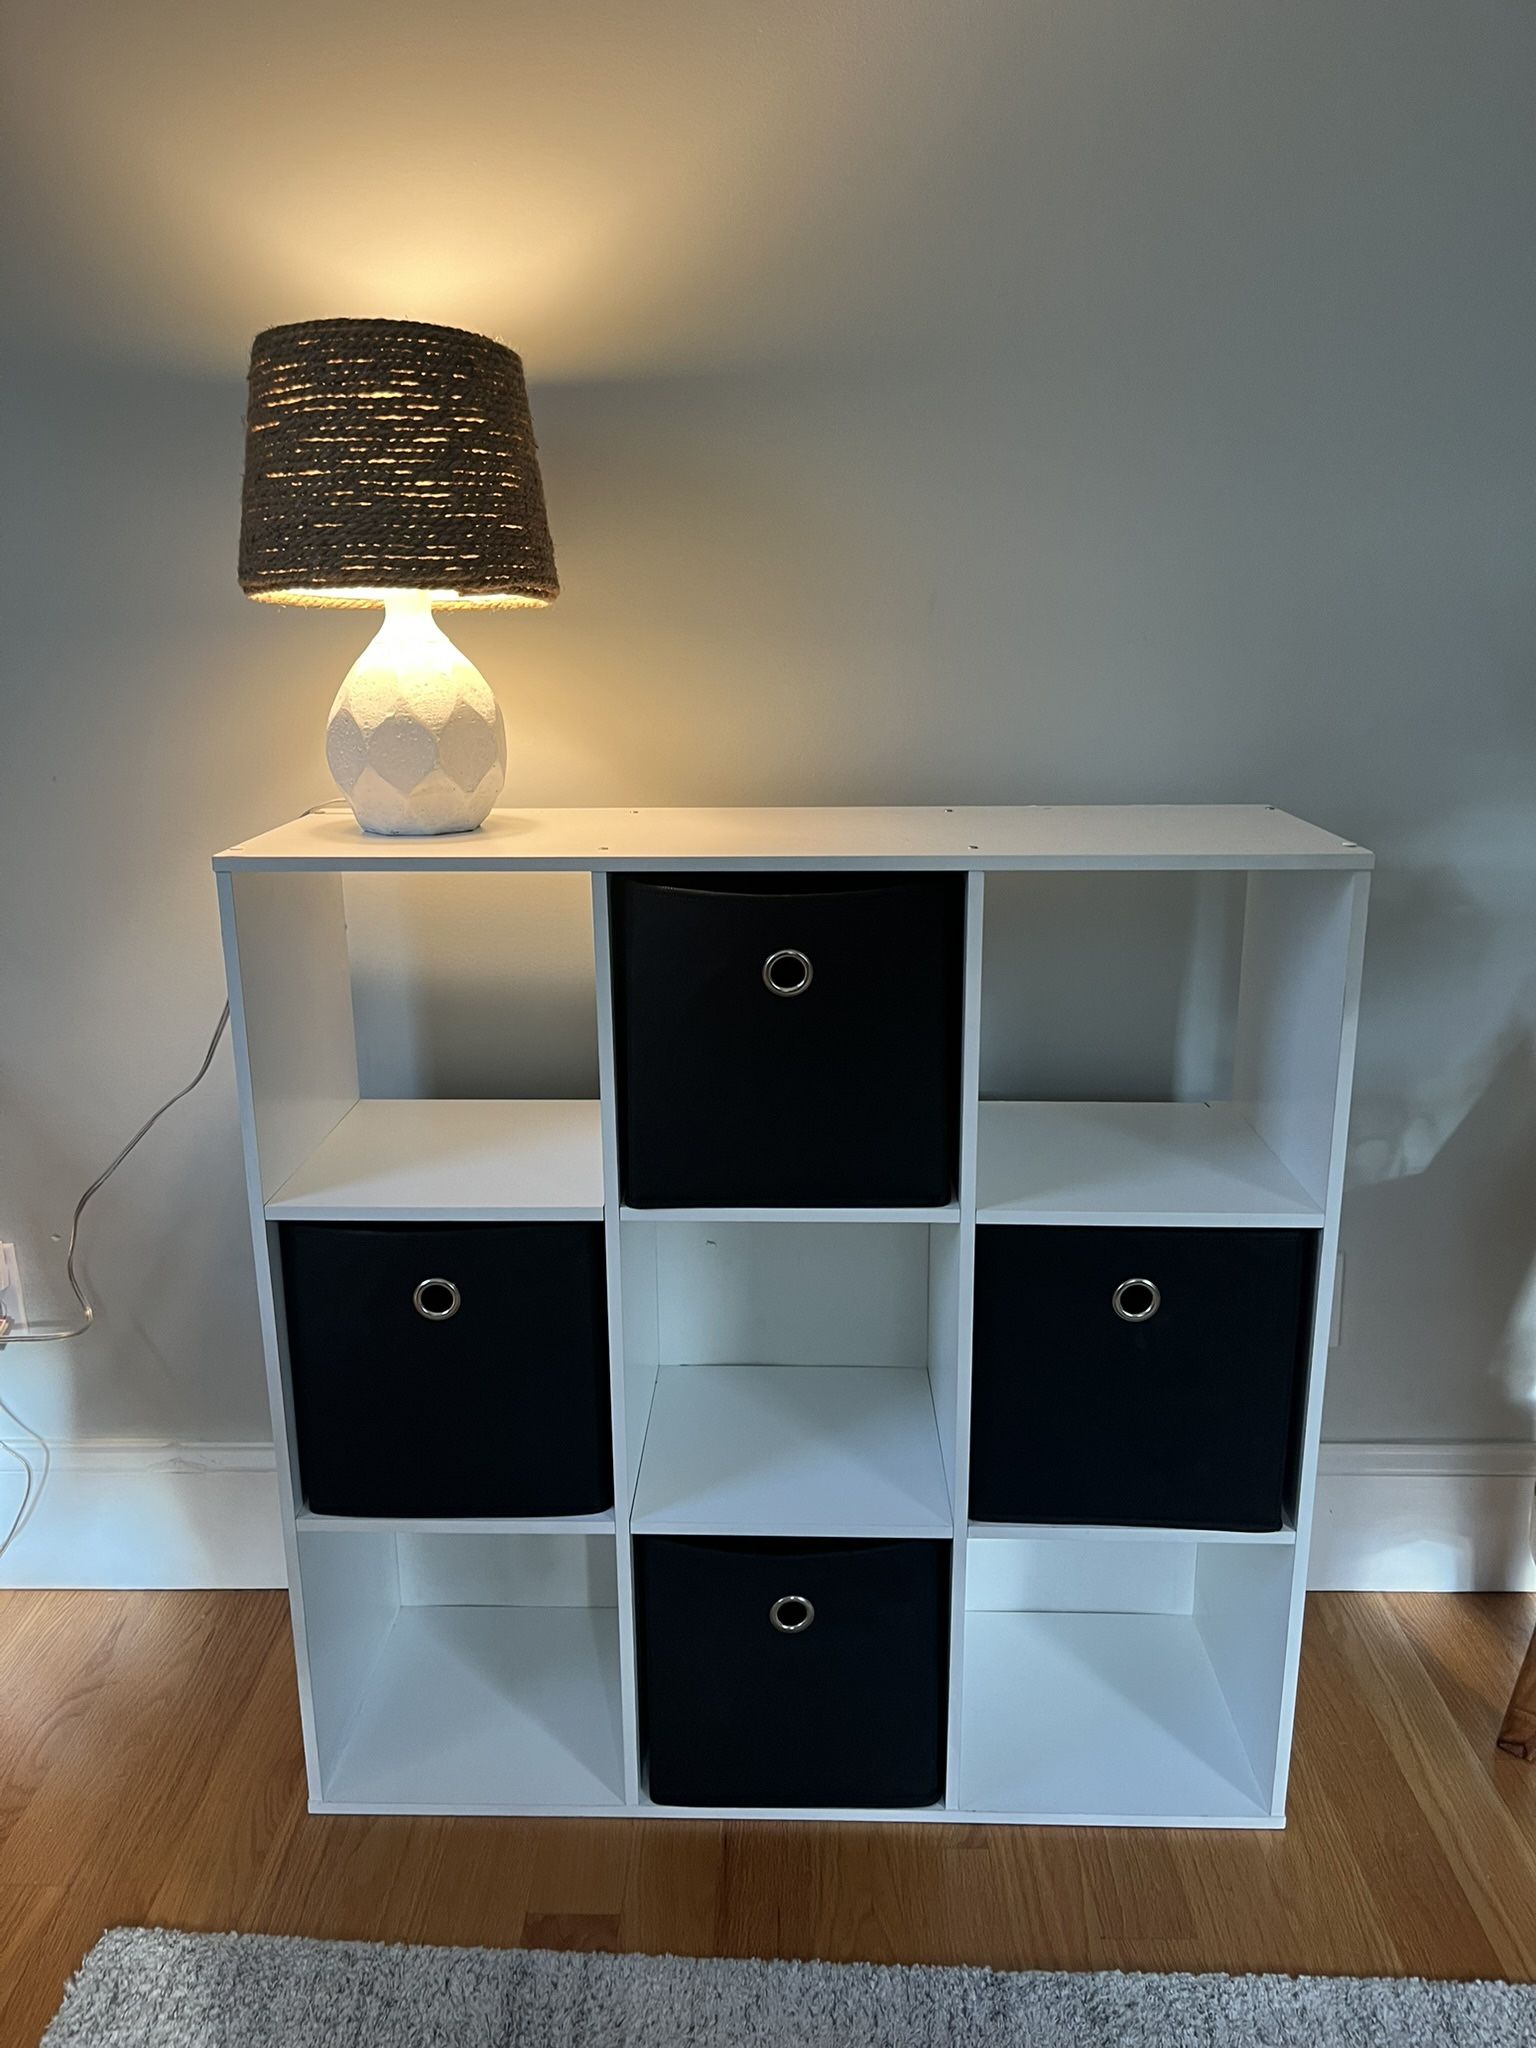 Cube Shelf With Black Cubes